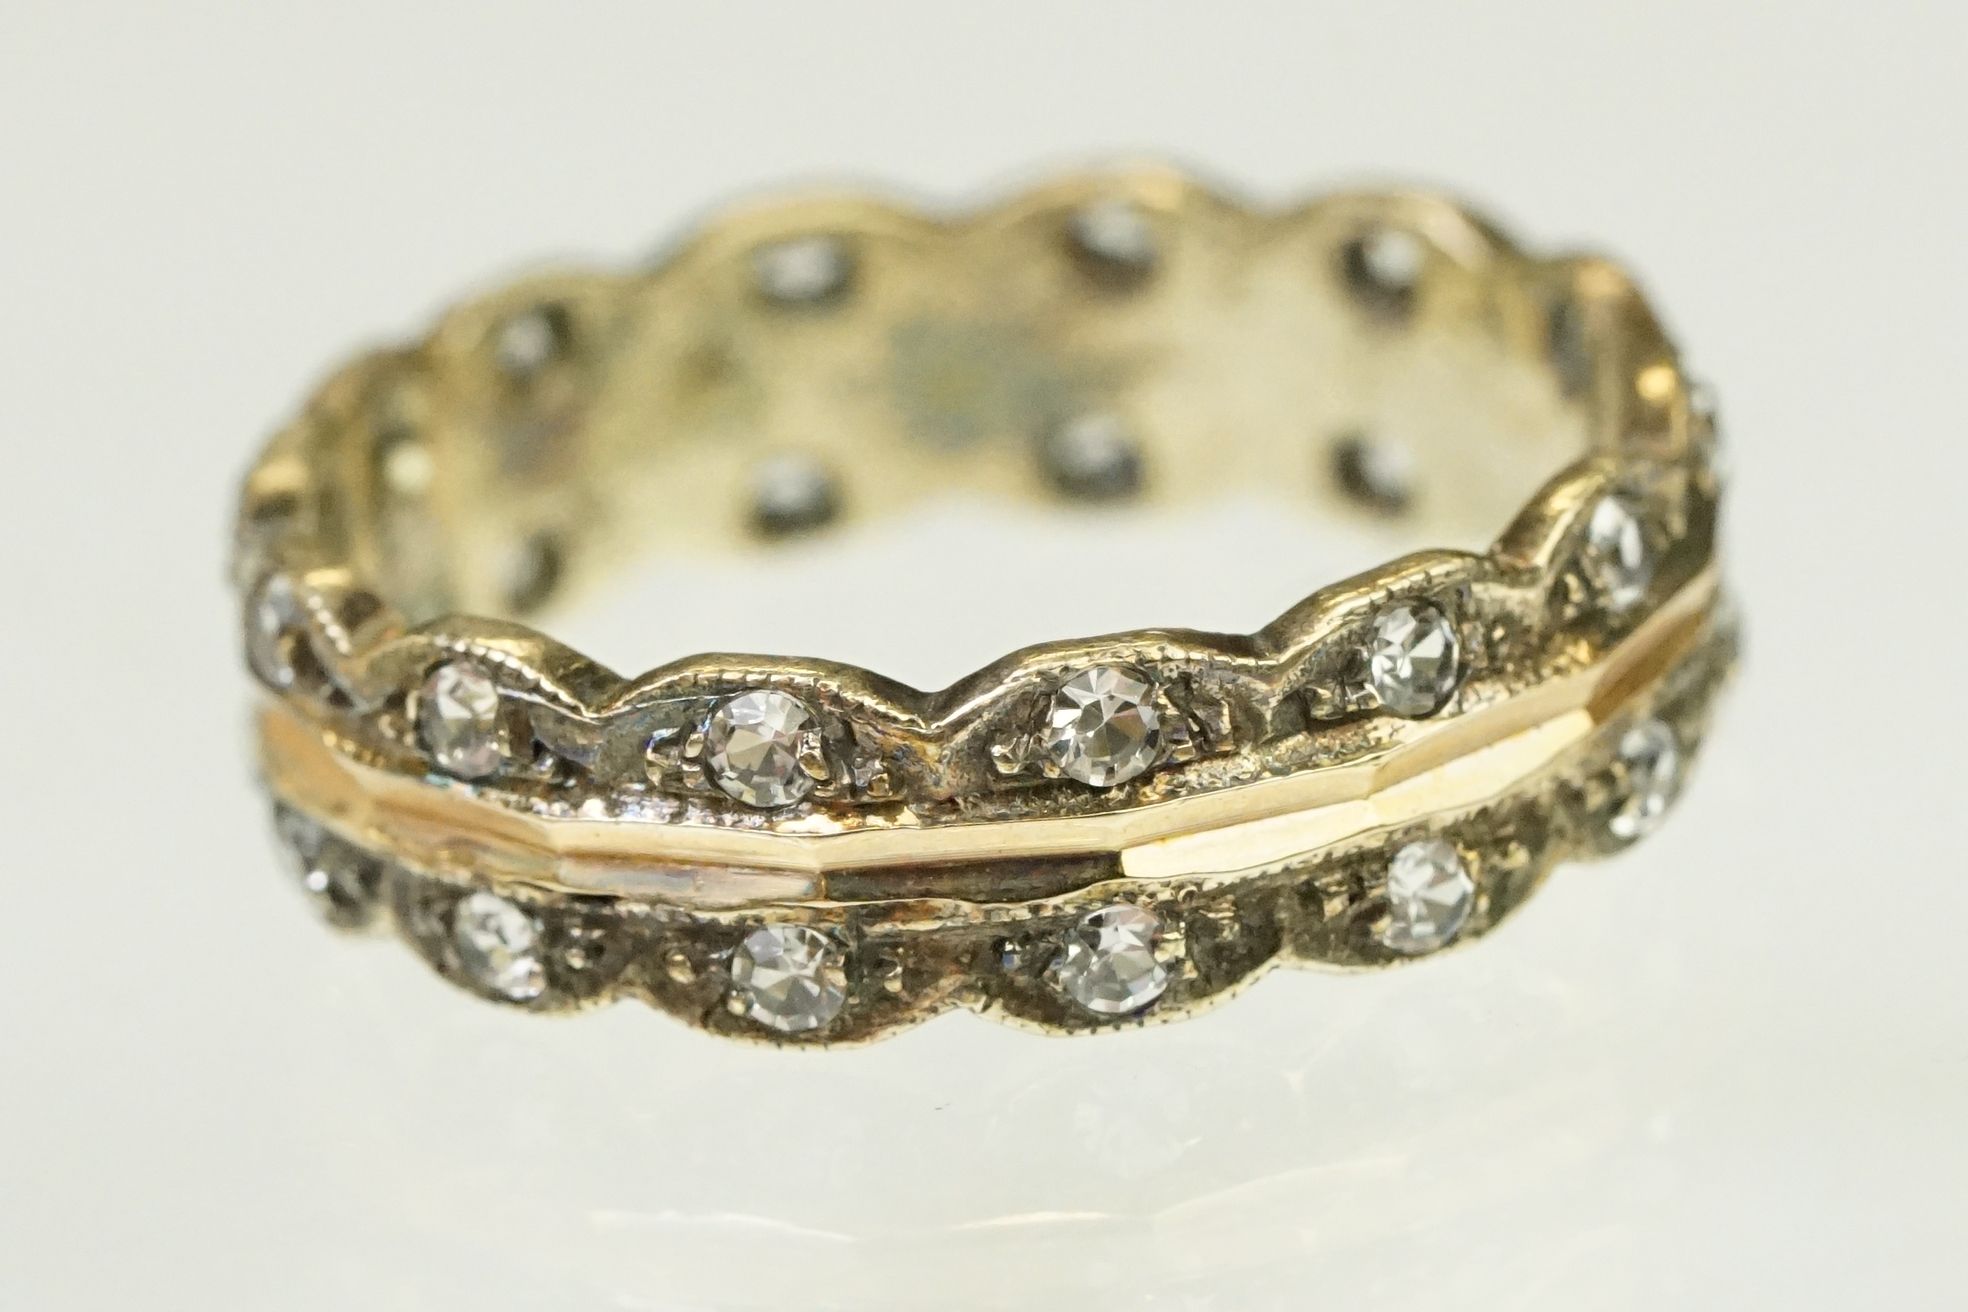 9ct gold hallmarked two tone eternity ring. The ring having a faceted rose gold centre with - Image 2 of 5